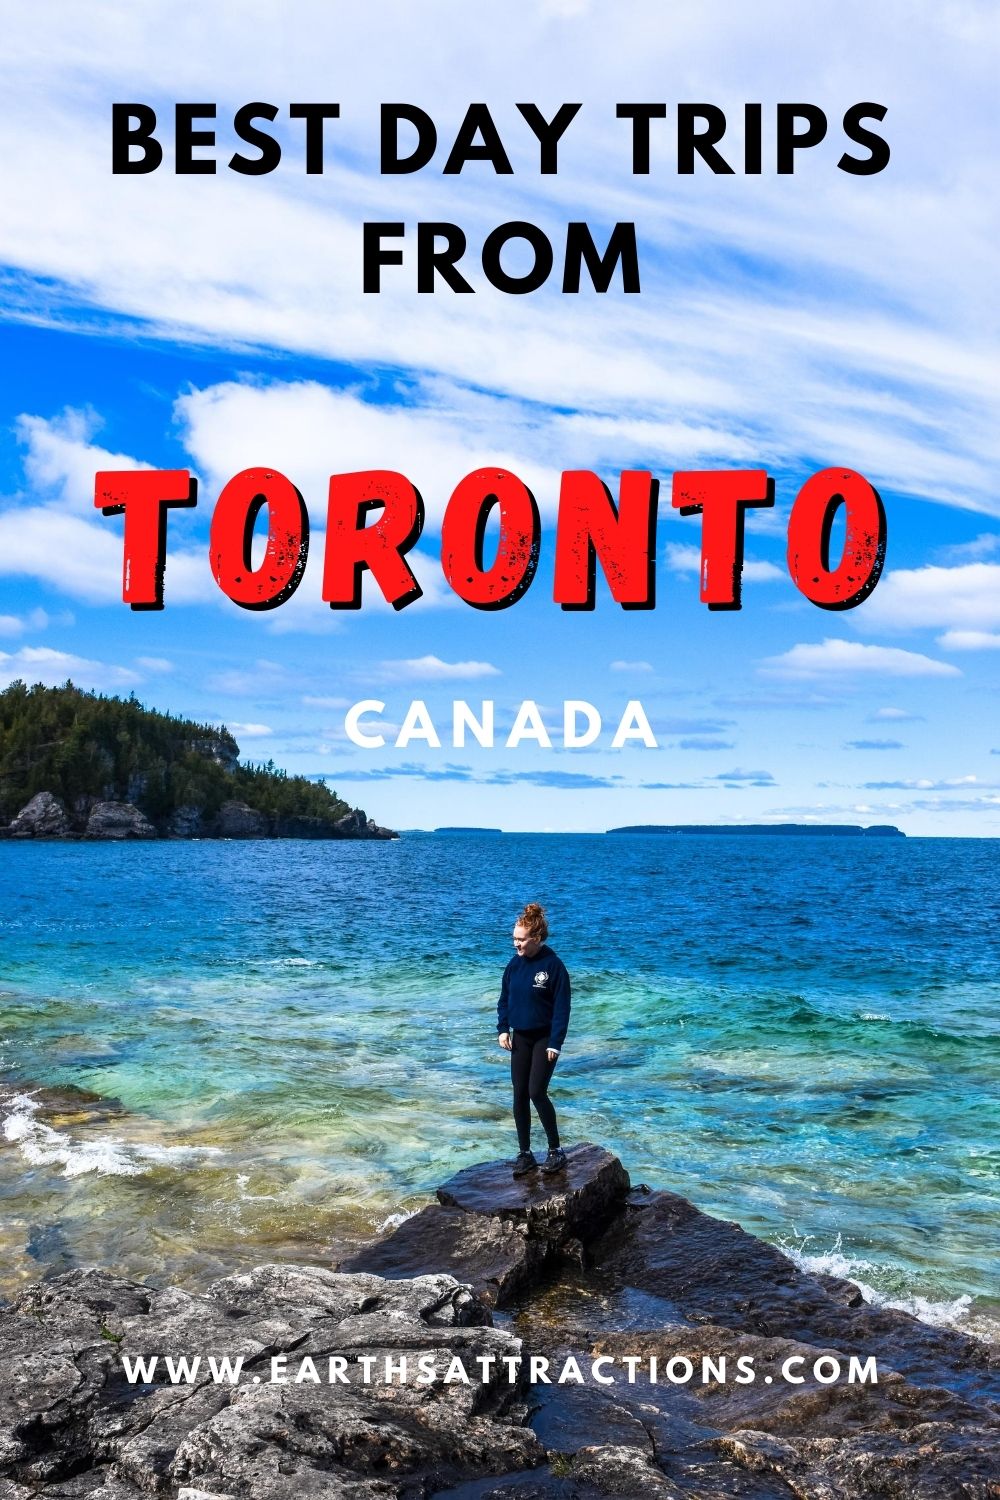 Toronto Day Trips. Discover the best things to see and do around Toronto from this article. It includes the best places to visit around Toronto, including Niagara Falls, Bruce Peninsula, Algonquin Park, Montreal, Grand River, Hamilton, and many more! Find out where to go near Toronto! #toronto #torontodaytrips #torontotrips #thingstodoneartoronto #canada #torontotravel #canadatravel #northamerica #earthsattractions #traveltips #traveldestinations